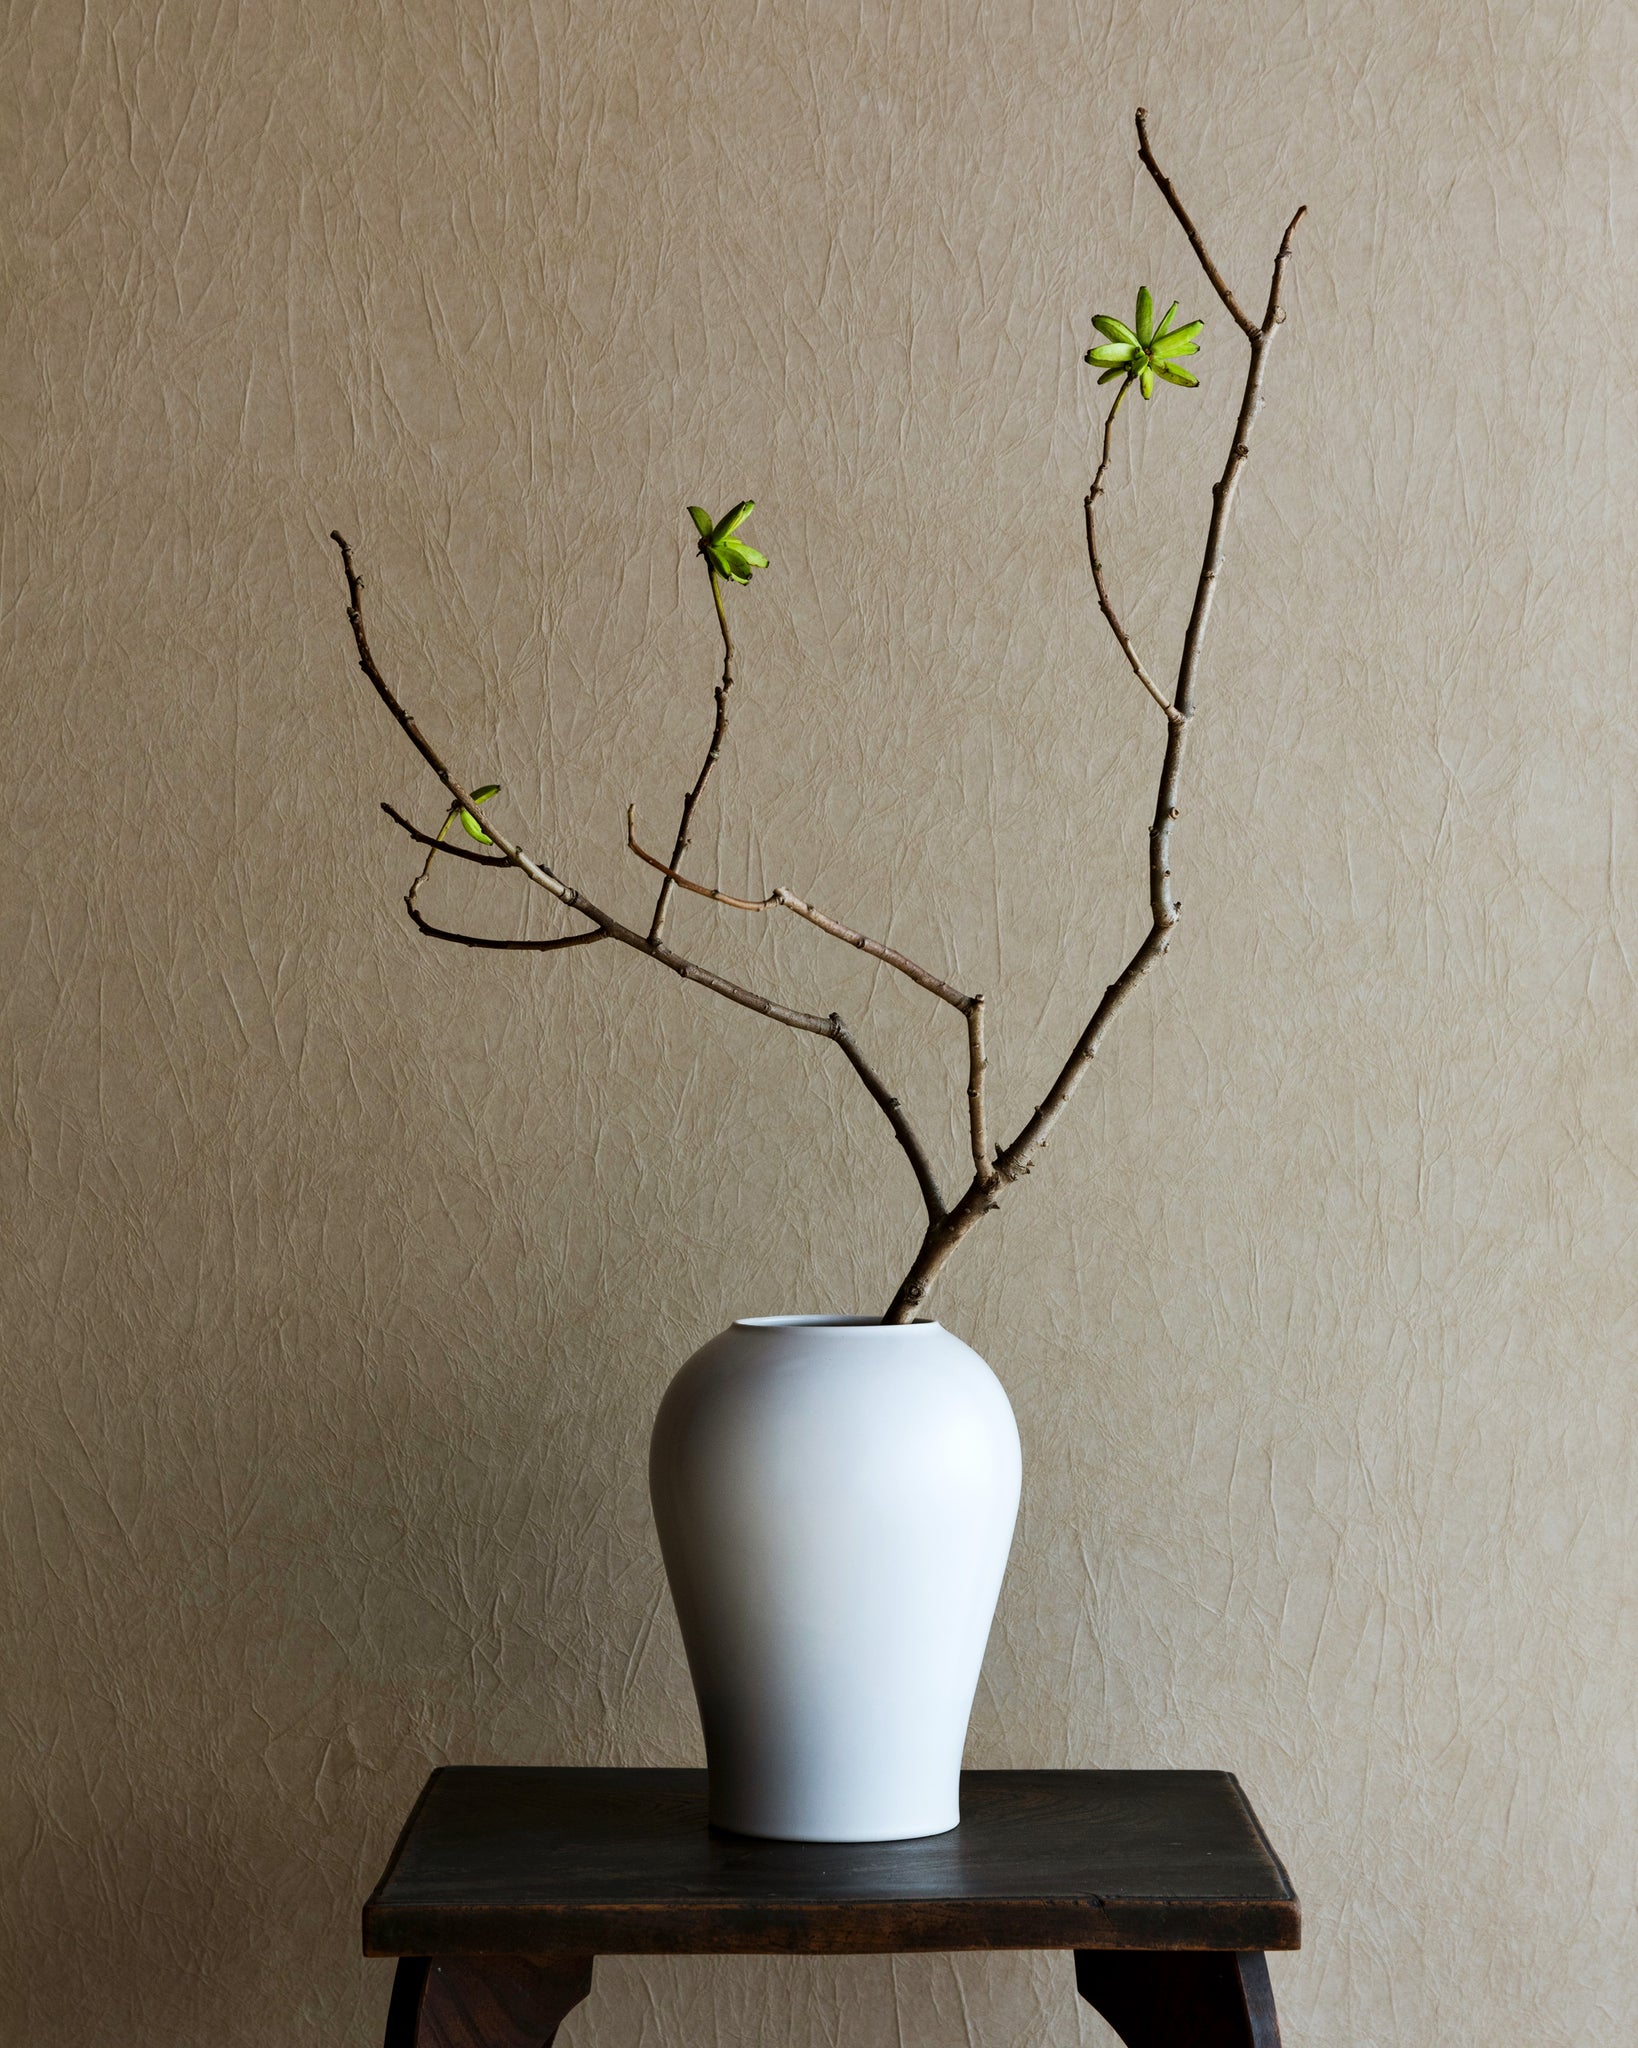 Large heishi vase placed on a dark brown wood stool with a long branch in it.